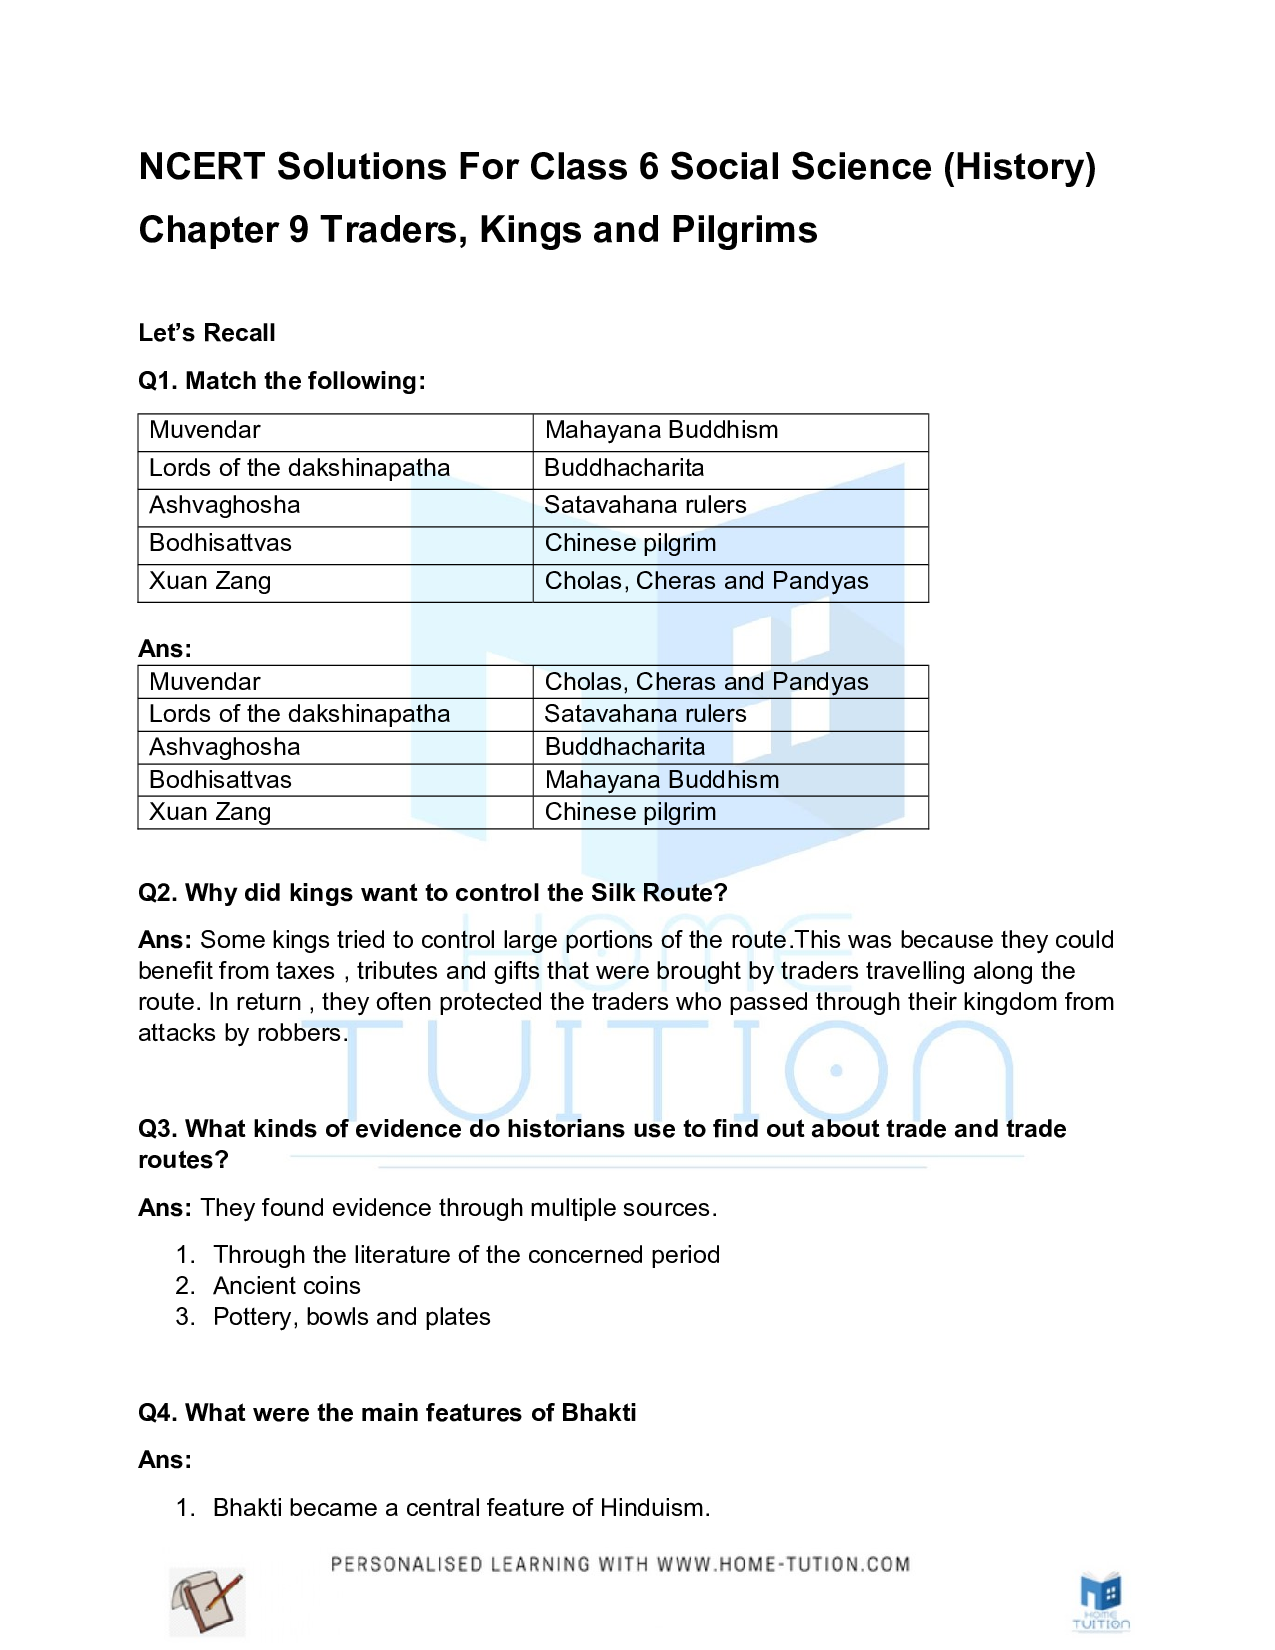 Chapter 9 Traders Kings and Pilgrims